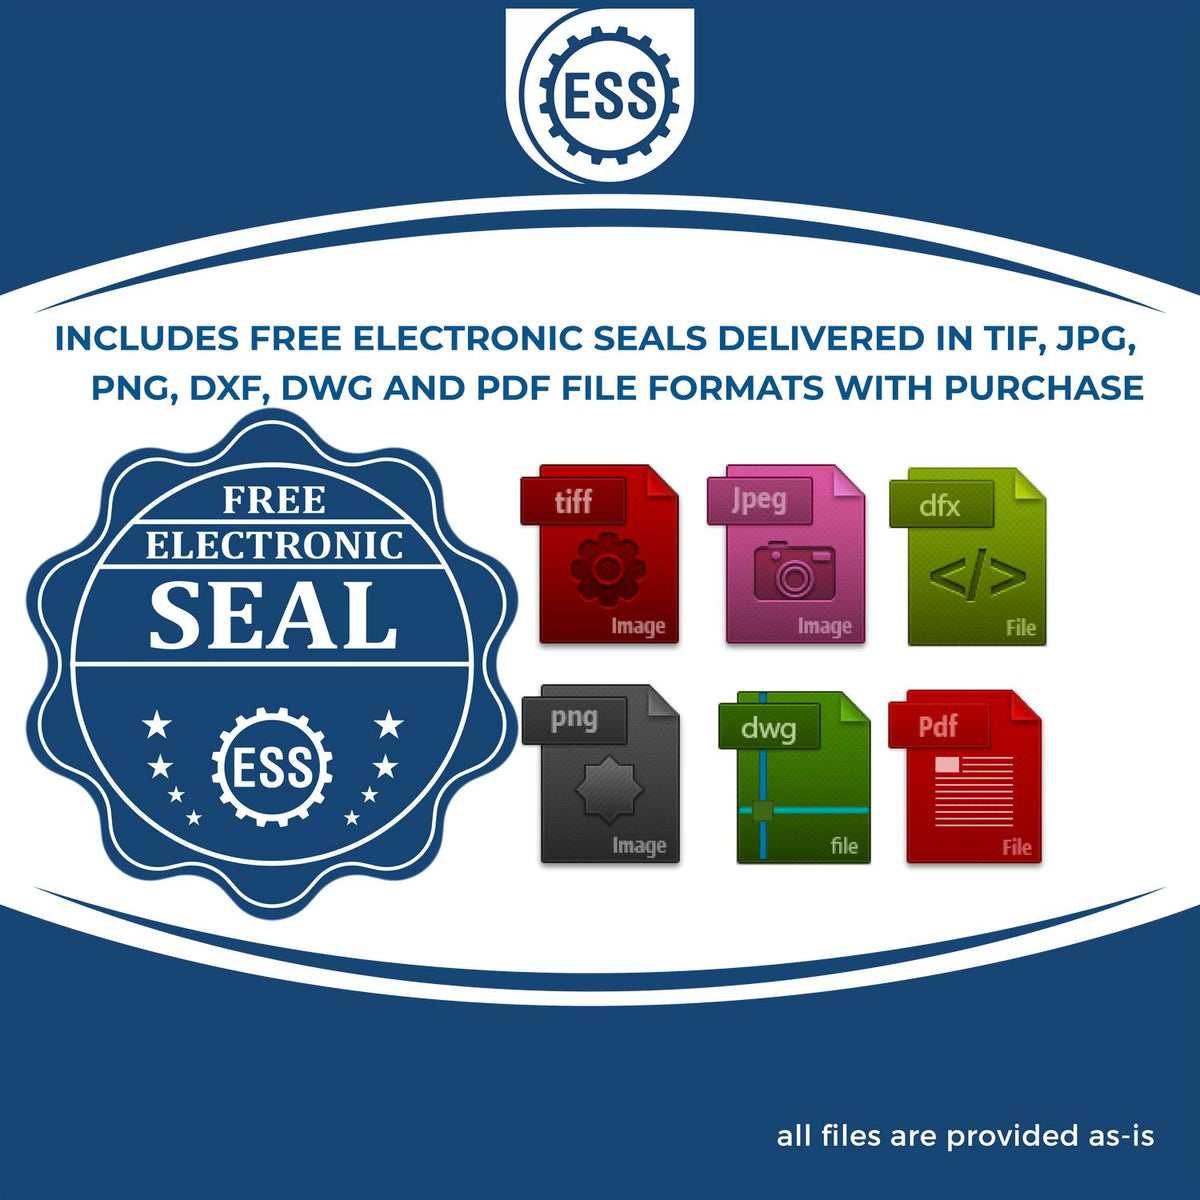 An infographic for the free electronic seal for the Long Reach Missouri PE Seal illustrating the different file type icons such as DXF, DWG, TIF, JPG and PNG.